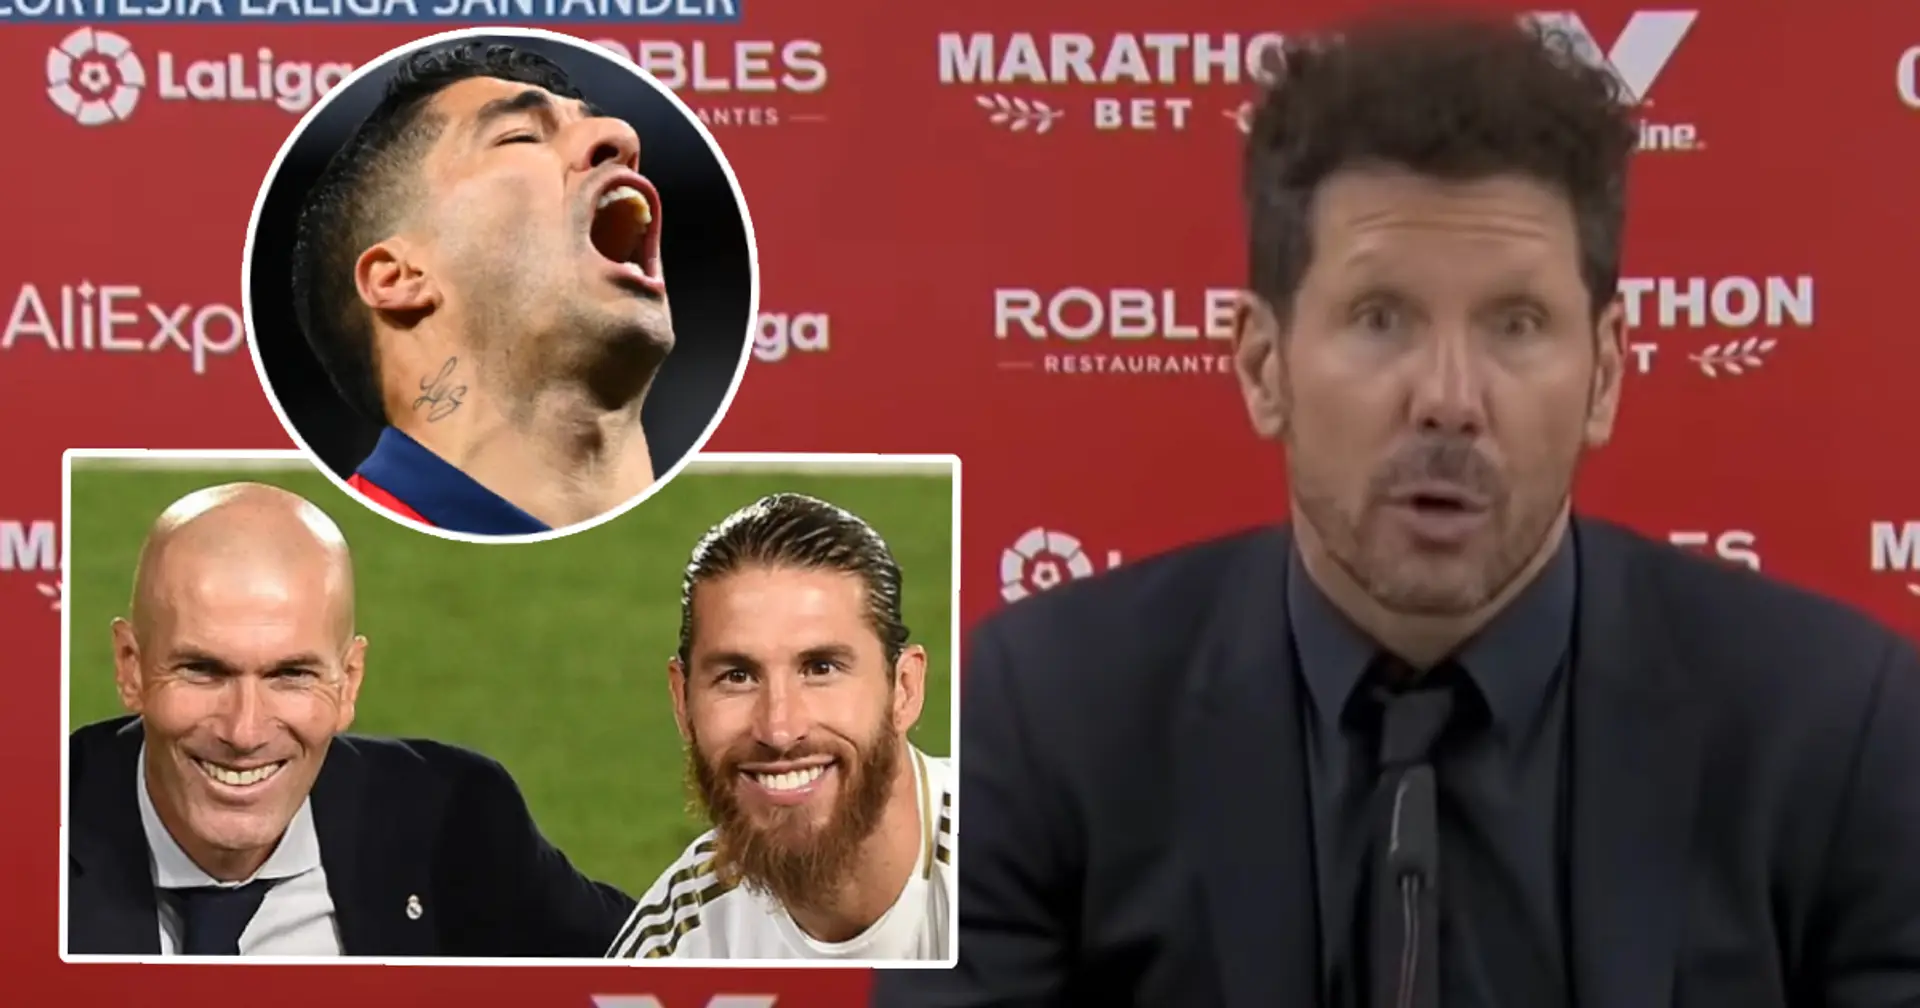 'We are about to throw the title away': Atletico fan livid after Sevilla loss